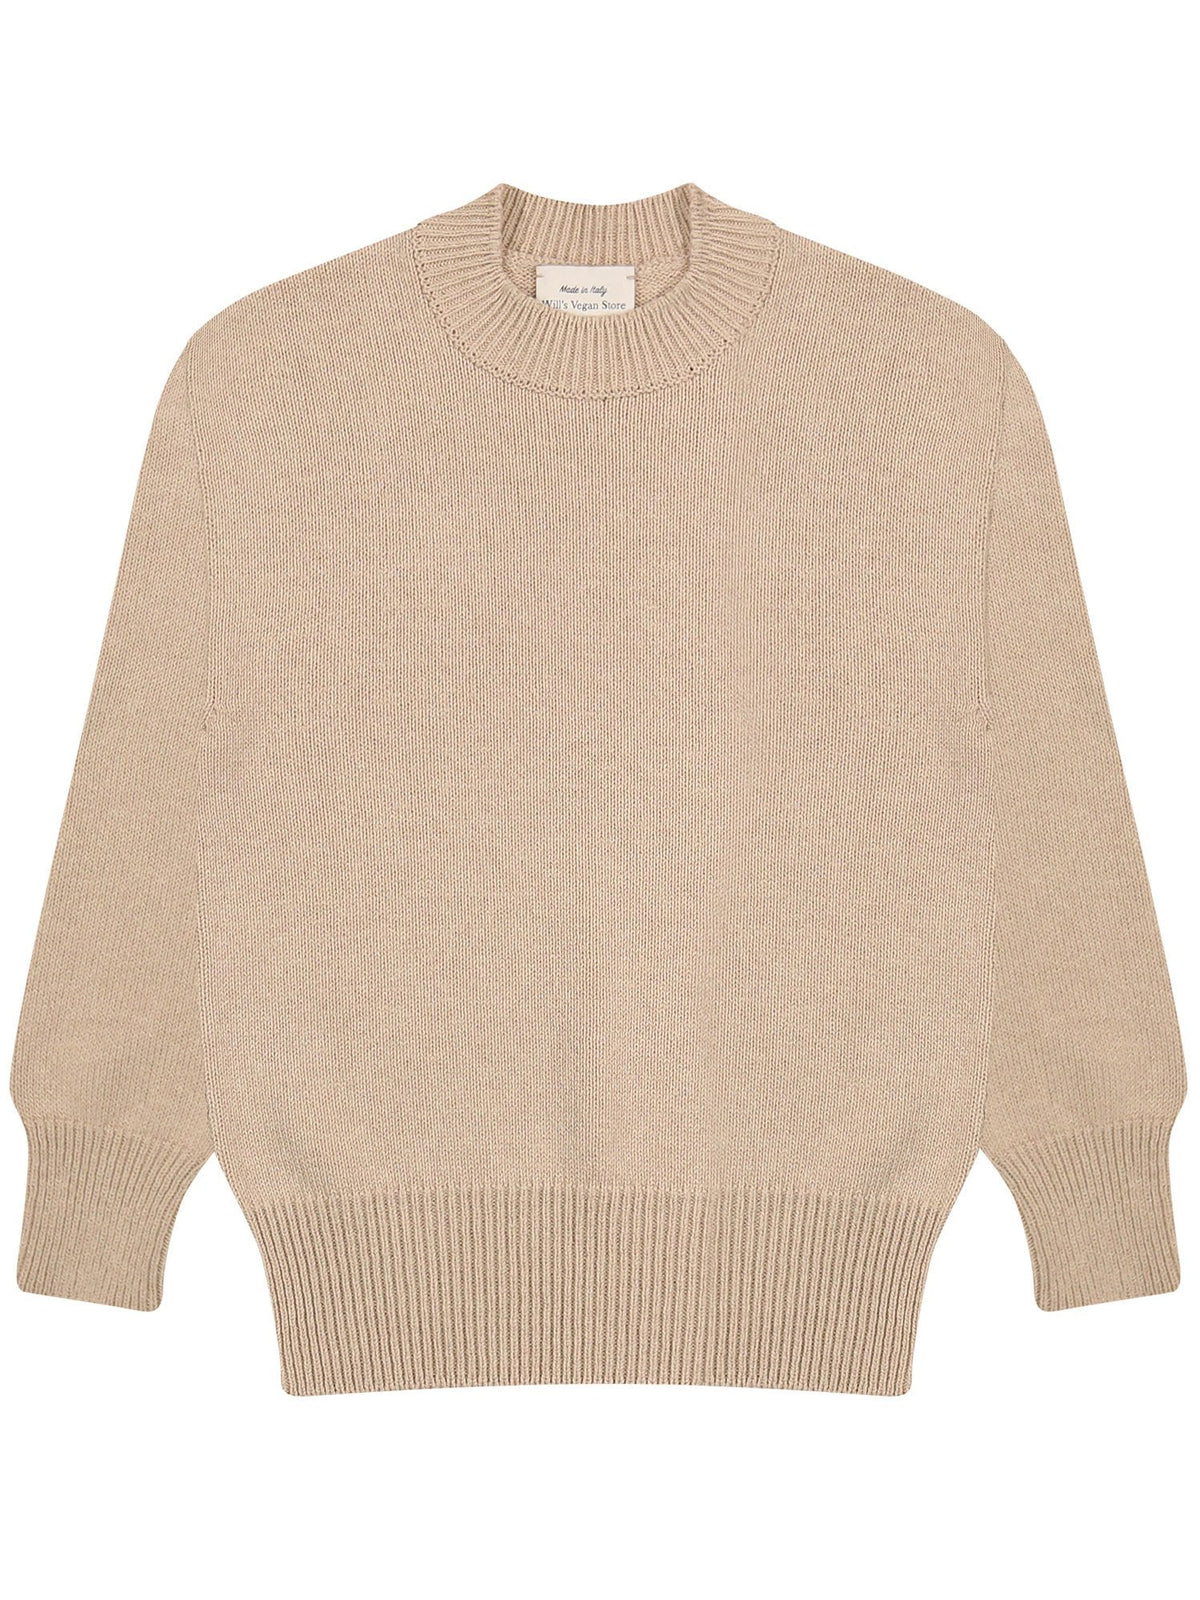 Recycled Knit Crew Neck